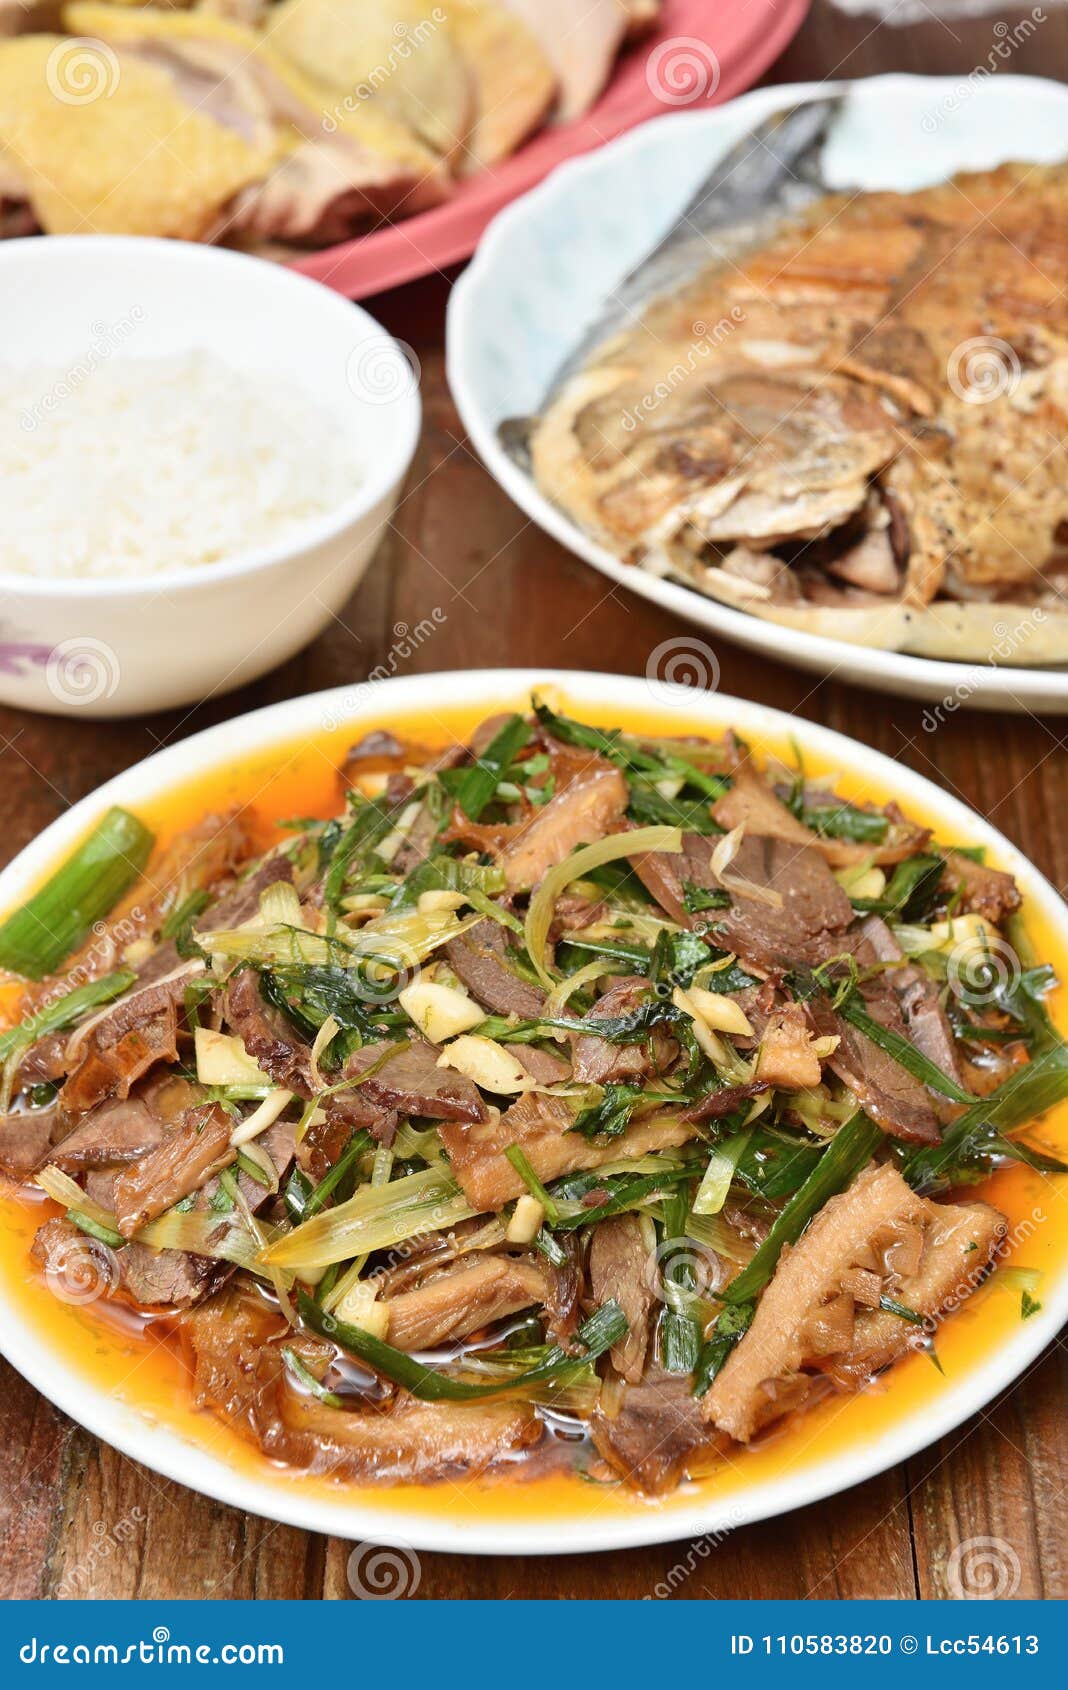 Sliced Beef and Ox Tongue in Chilli Sauce Stock Photo - Image of sauce ...